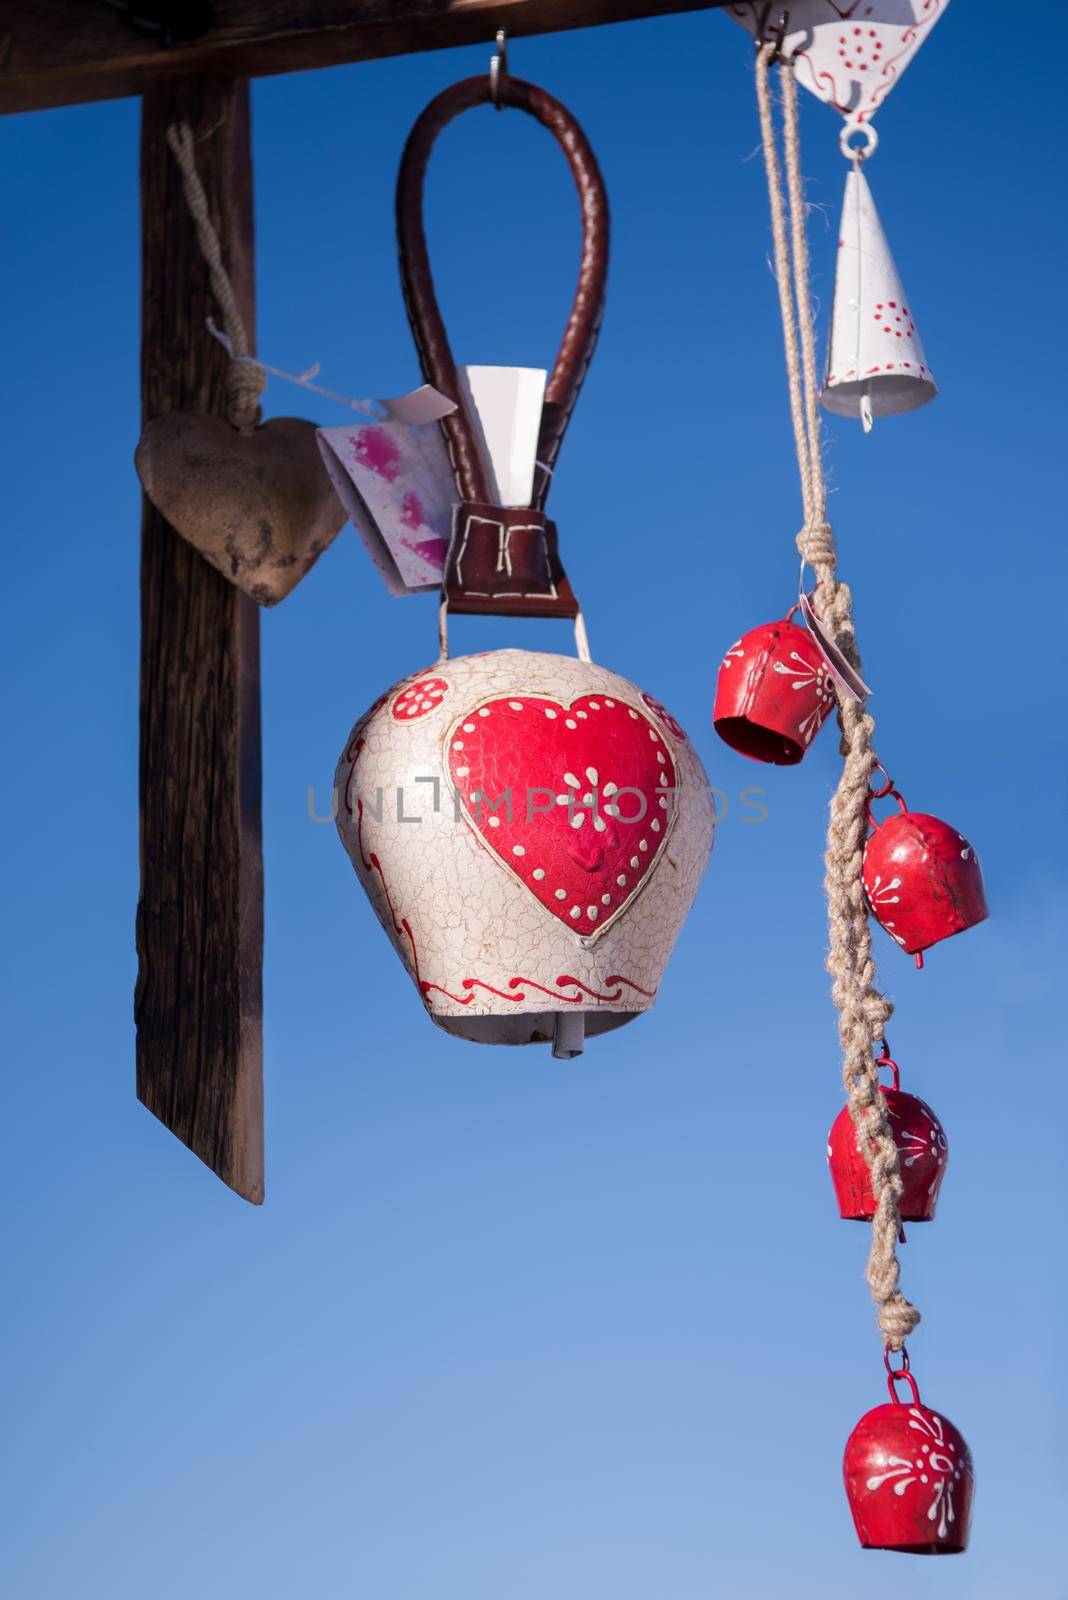 traditional cow bells as home decoration or gift hanging on a wooden beam with blue sky in background